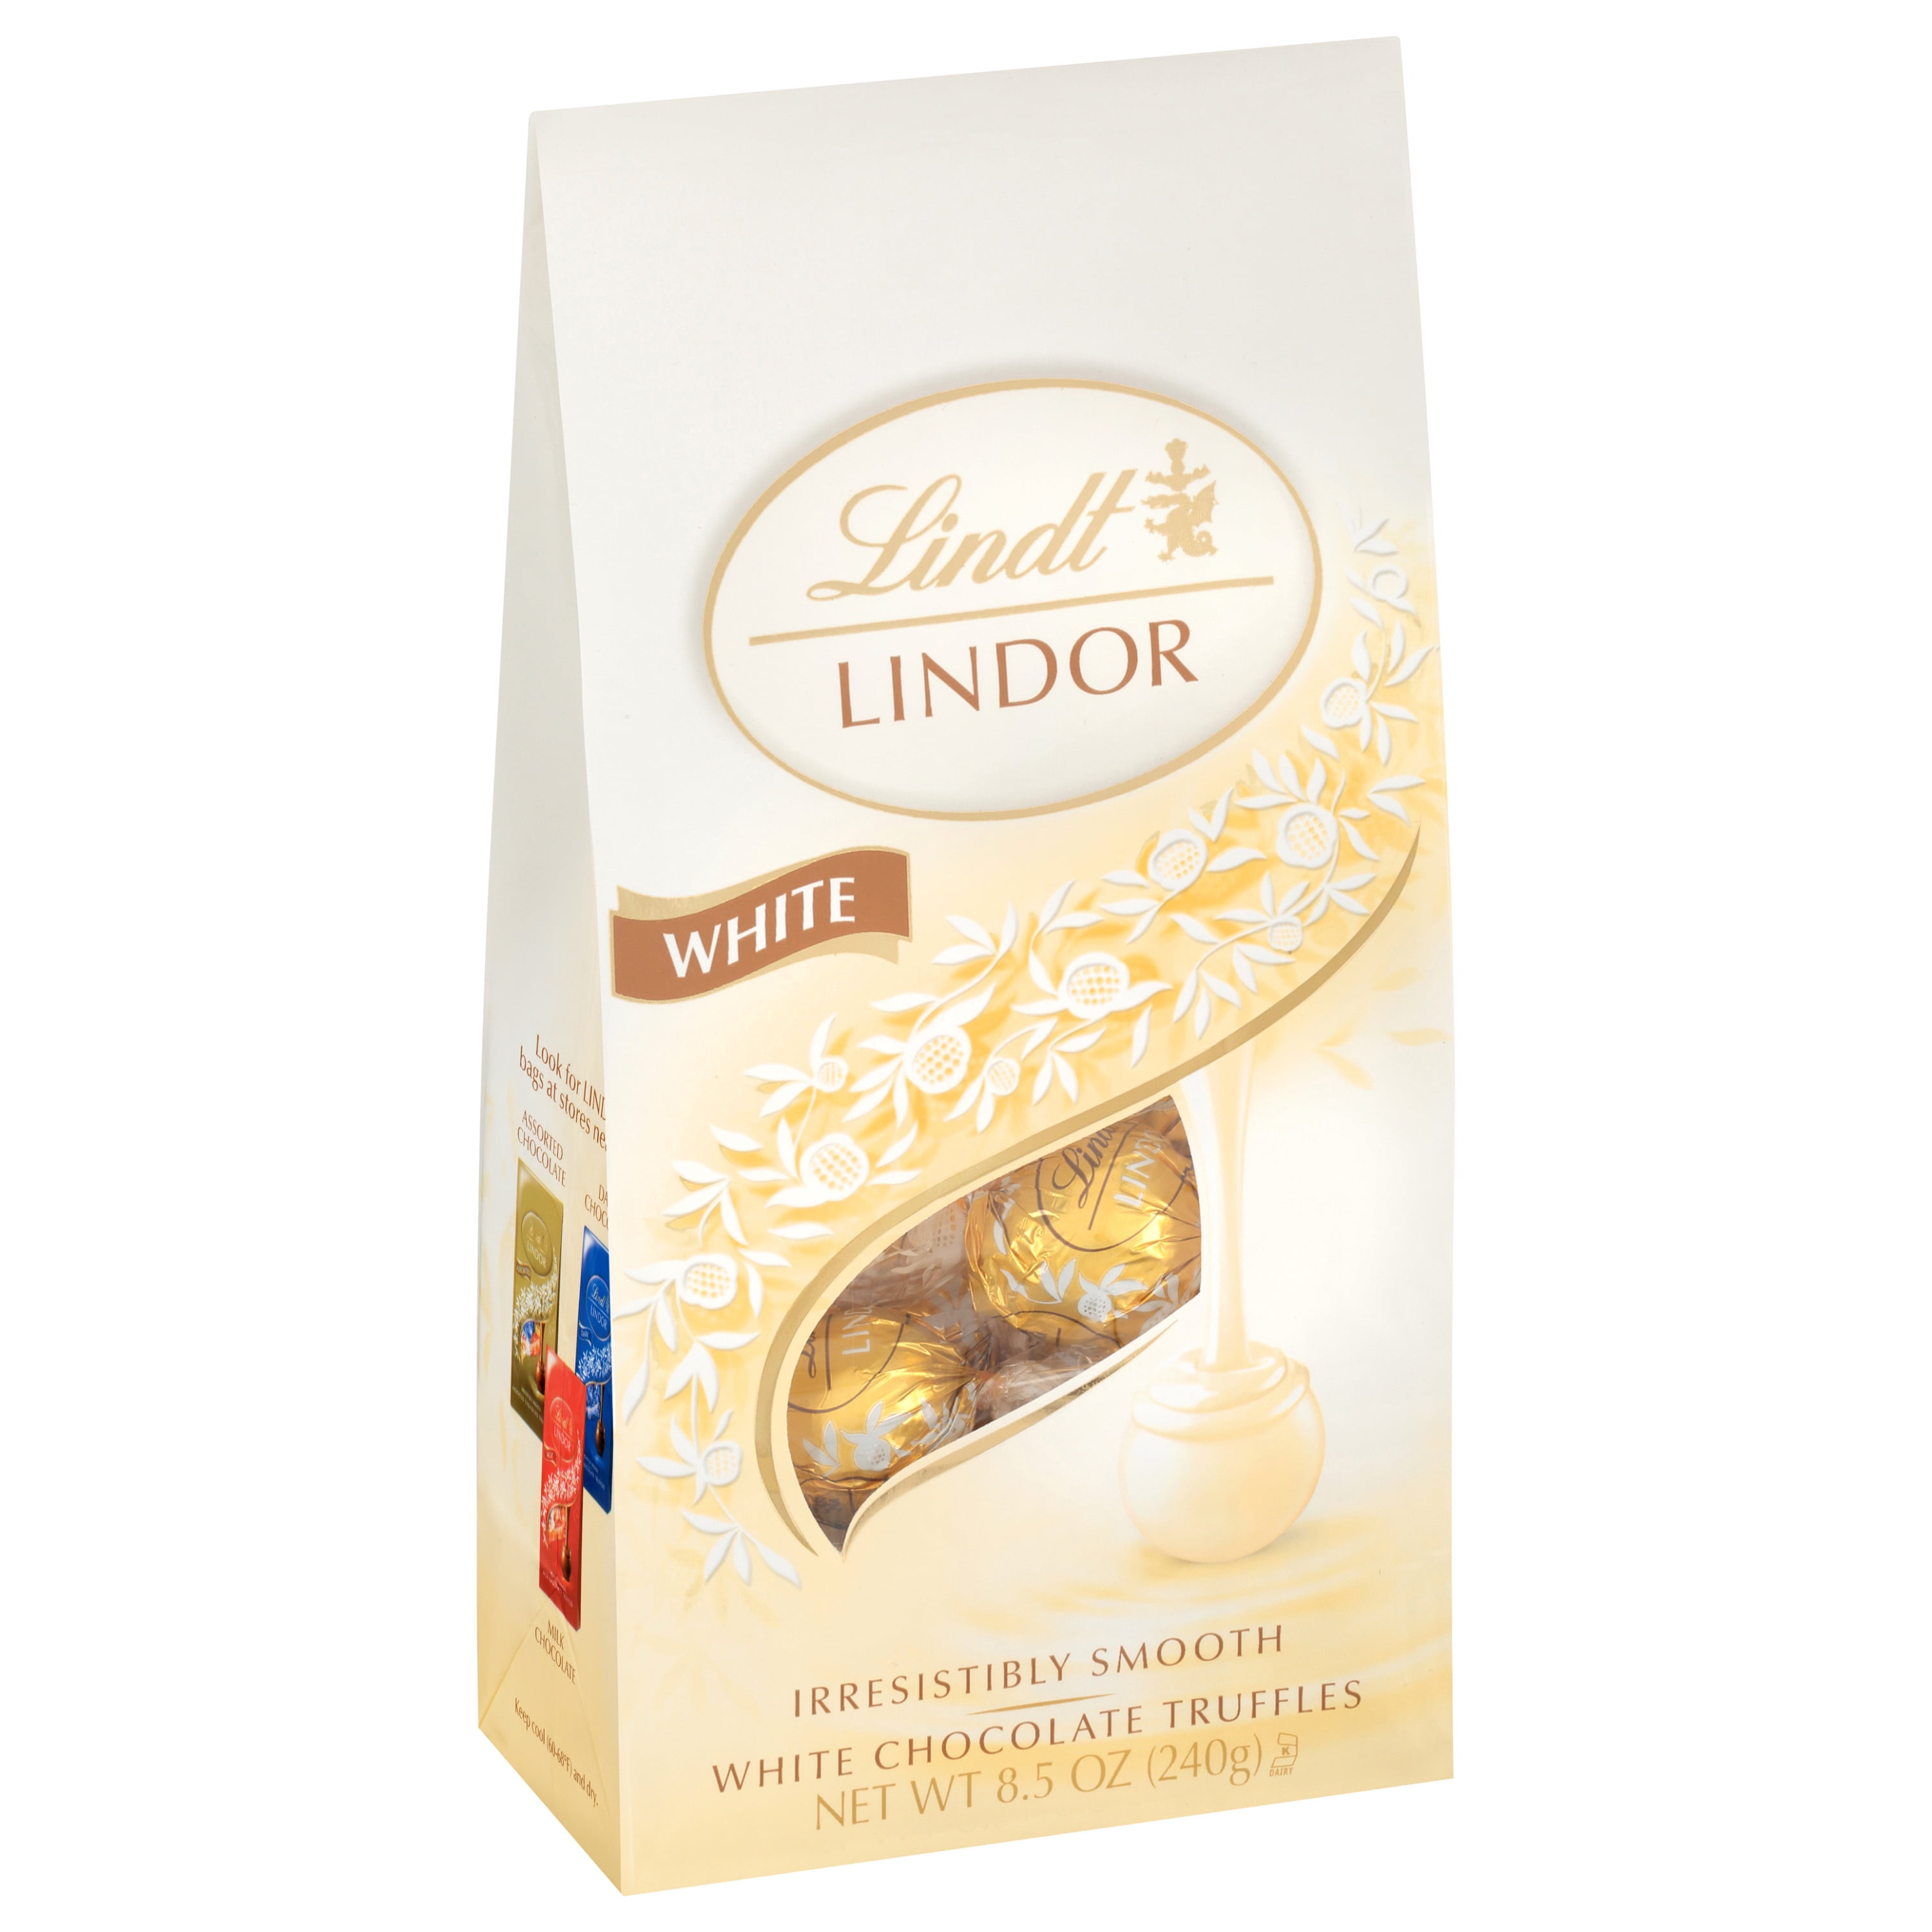 Lindt LINDOR, White Chocolate Candy Truffles, Easter Chocolate, 8.5 oz. 